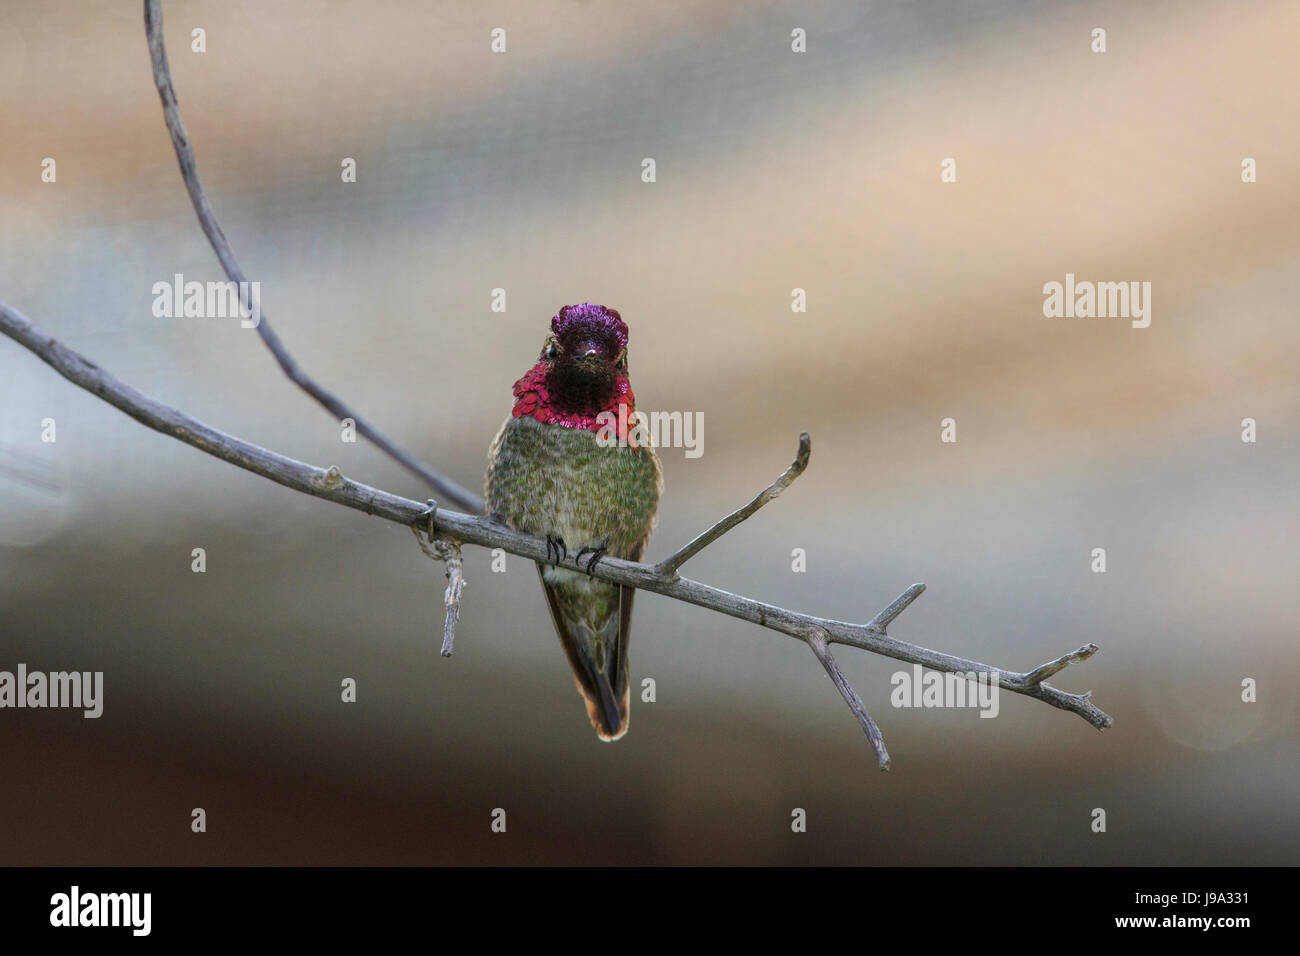 Anna's hummingbird (Calypte anna) perched on tree branch. Stock Photo